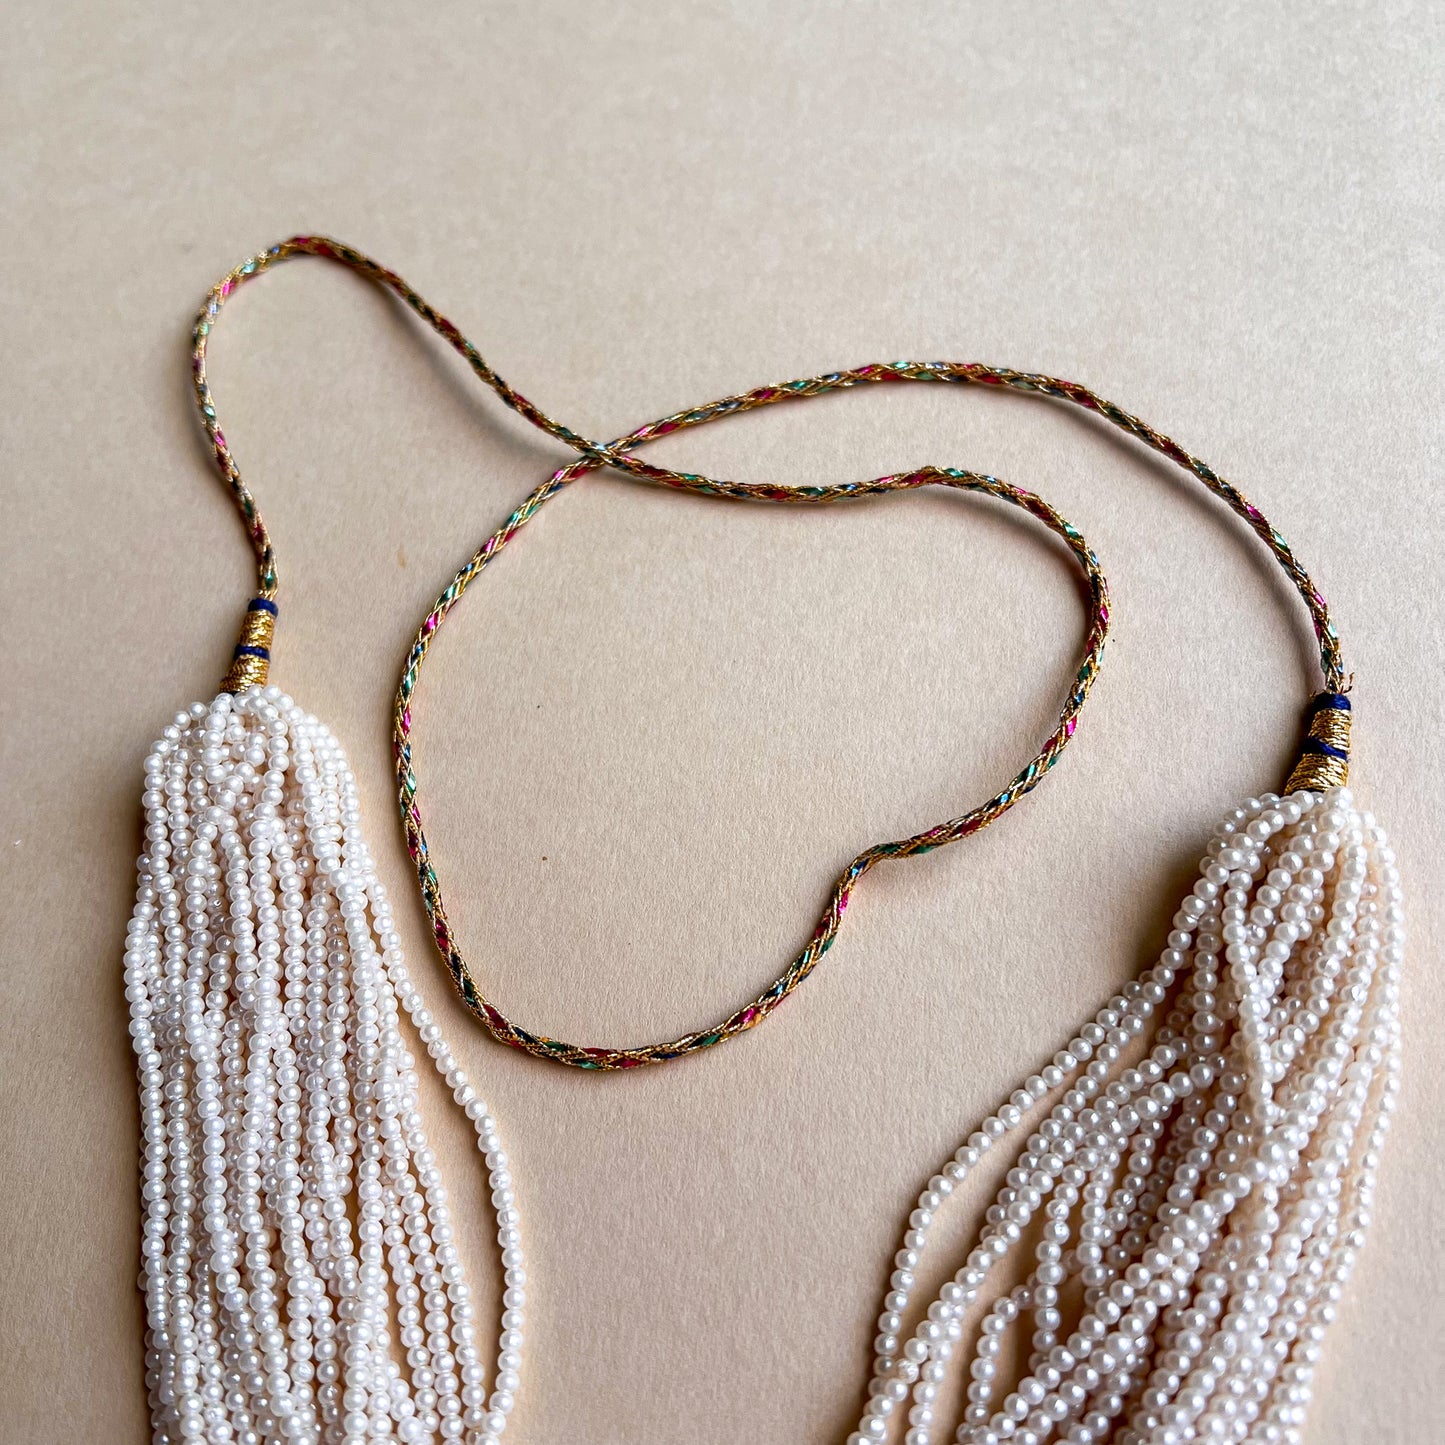 Handmade Indian Necklace With Micro Pearls and Reversible Pendant